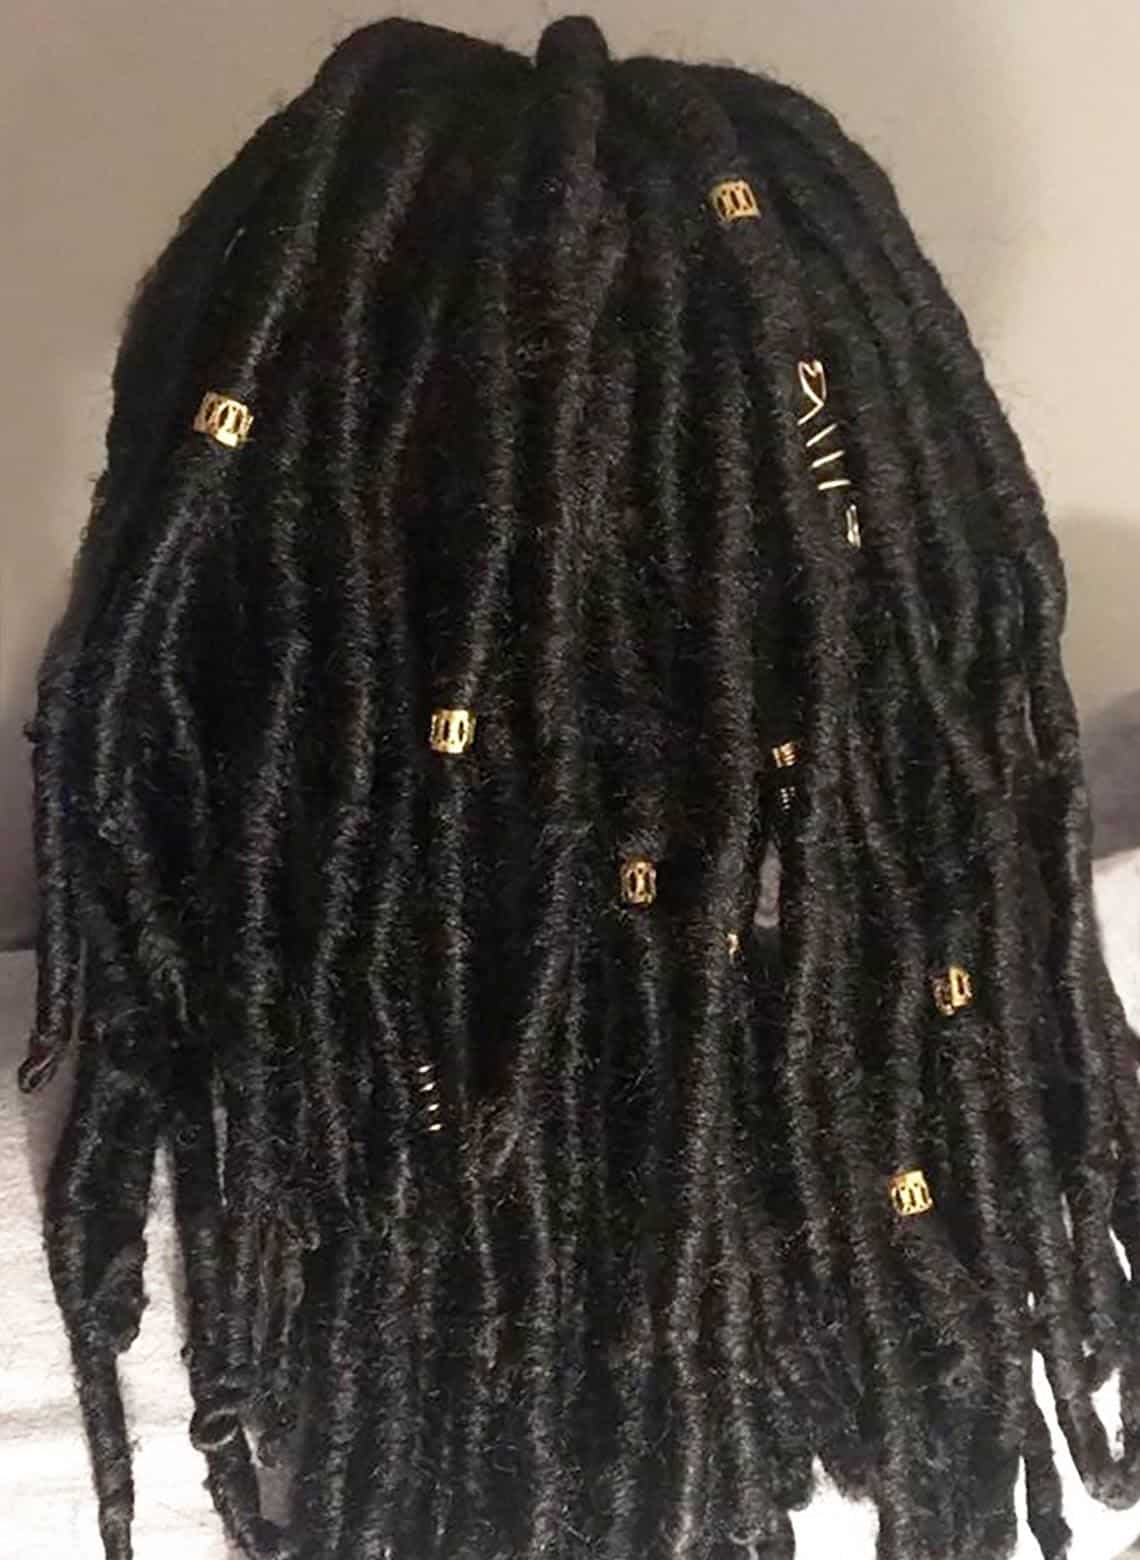 person with dreads and metal cuffs